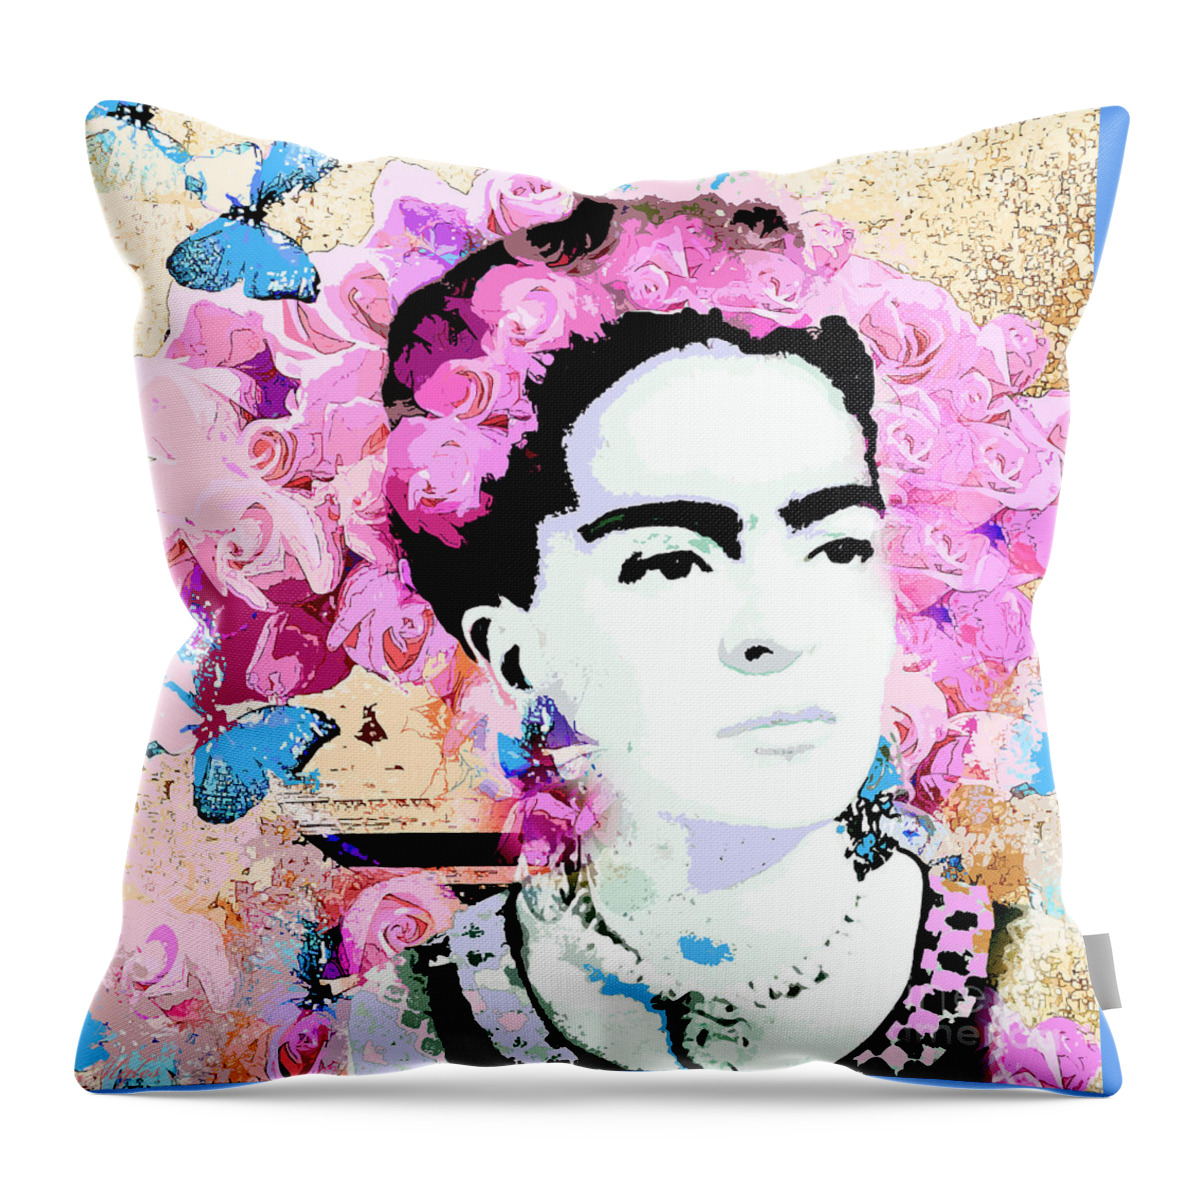 Frida Kahlo Throw Pillow featuring the painting Frida Kahlo #2 by Saundra Myles